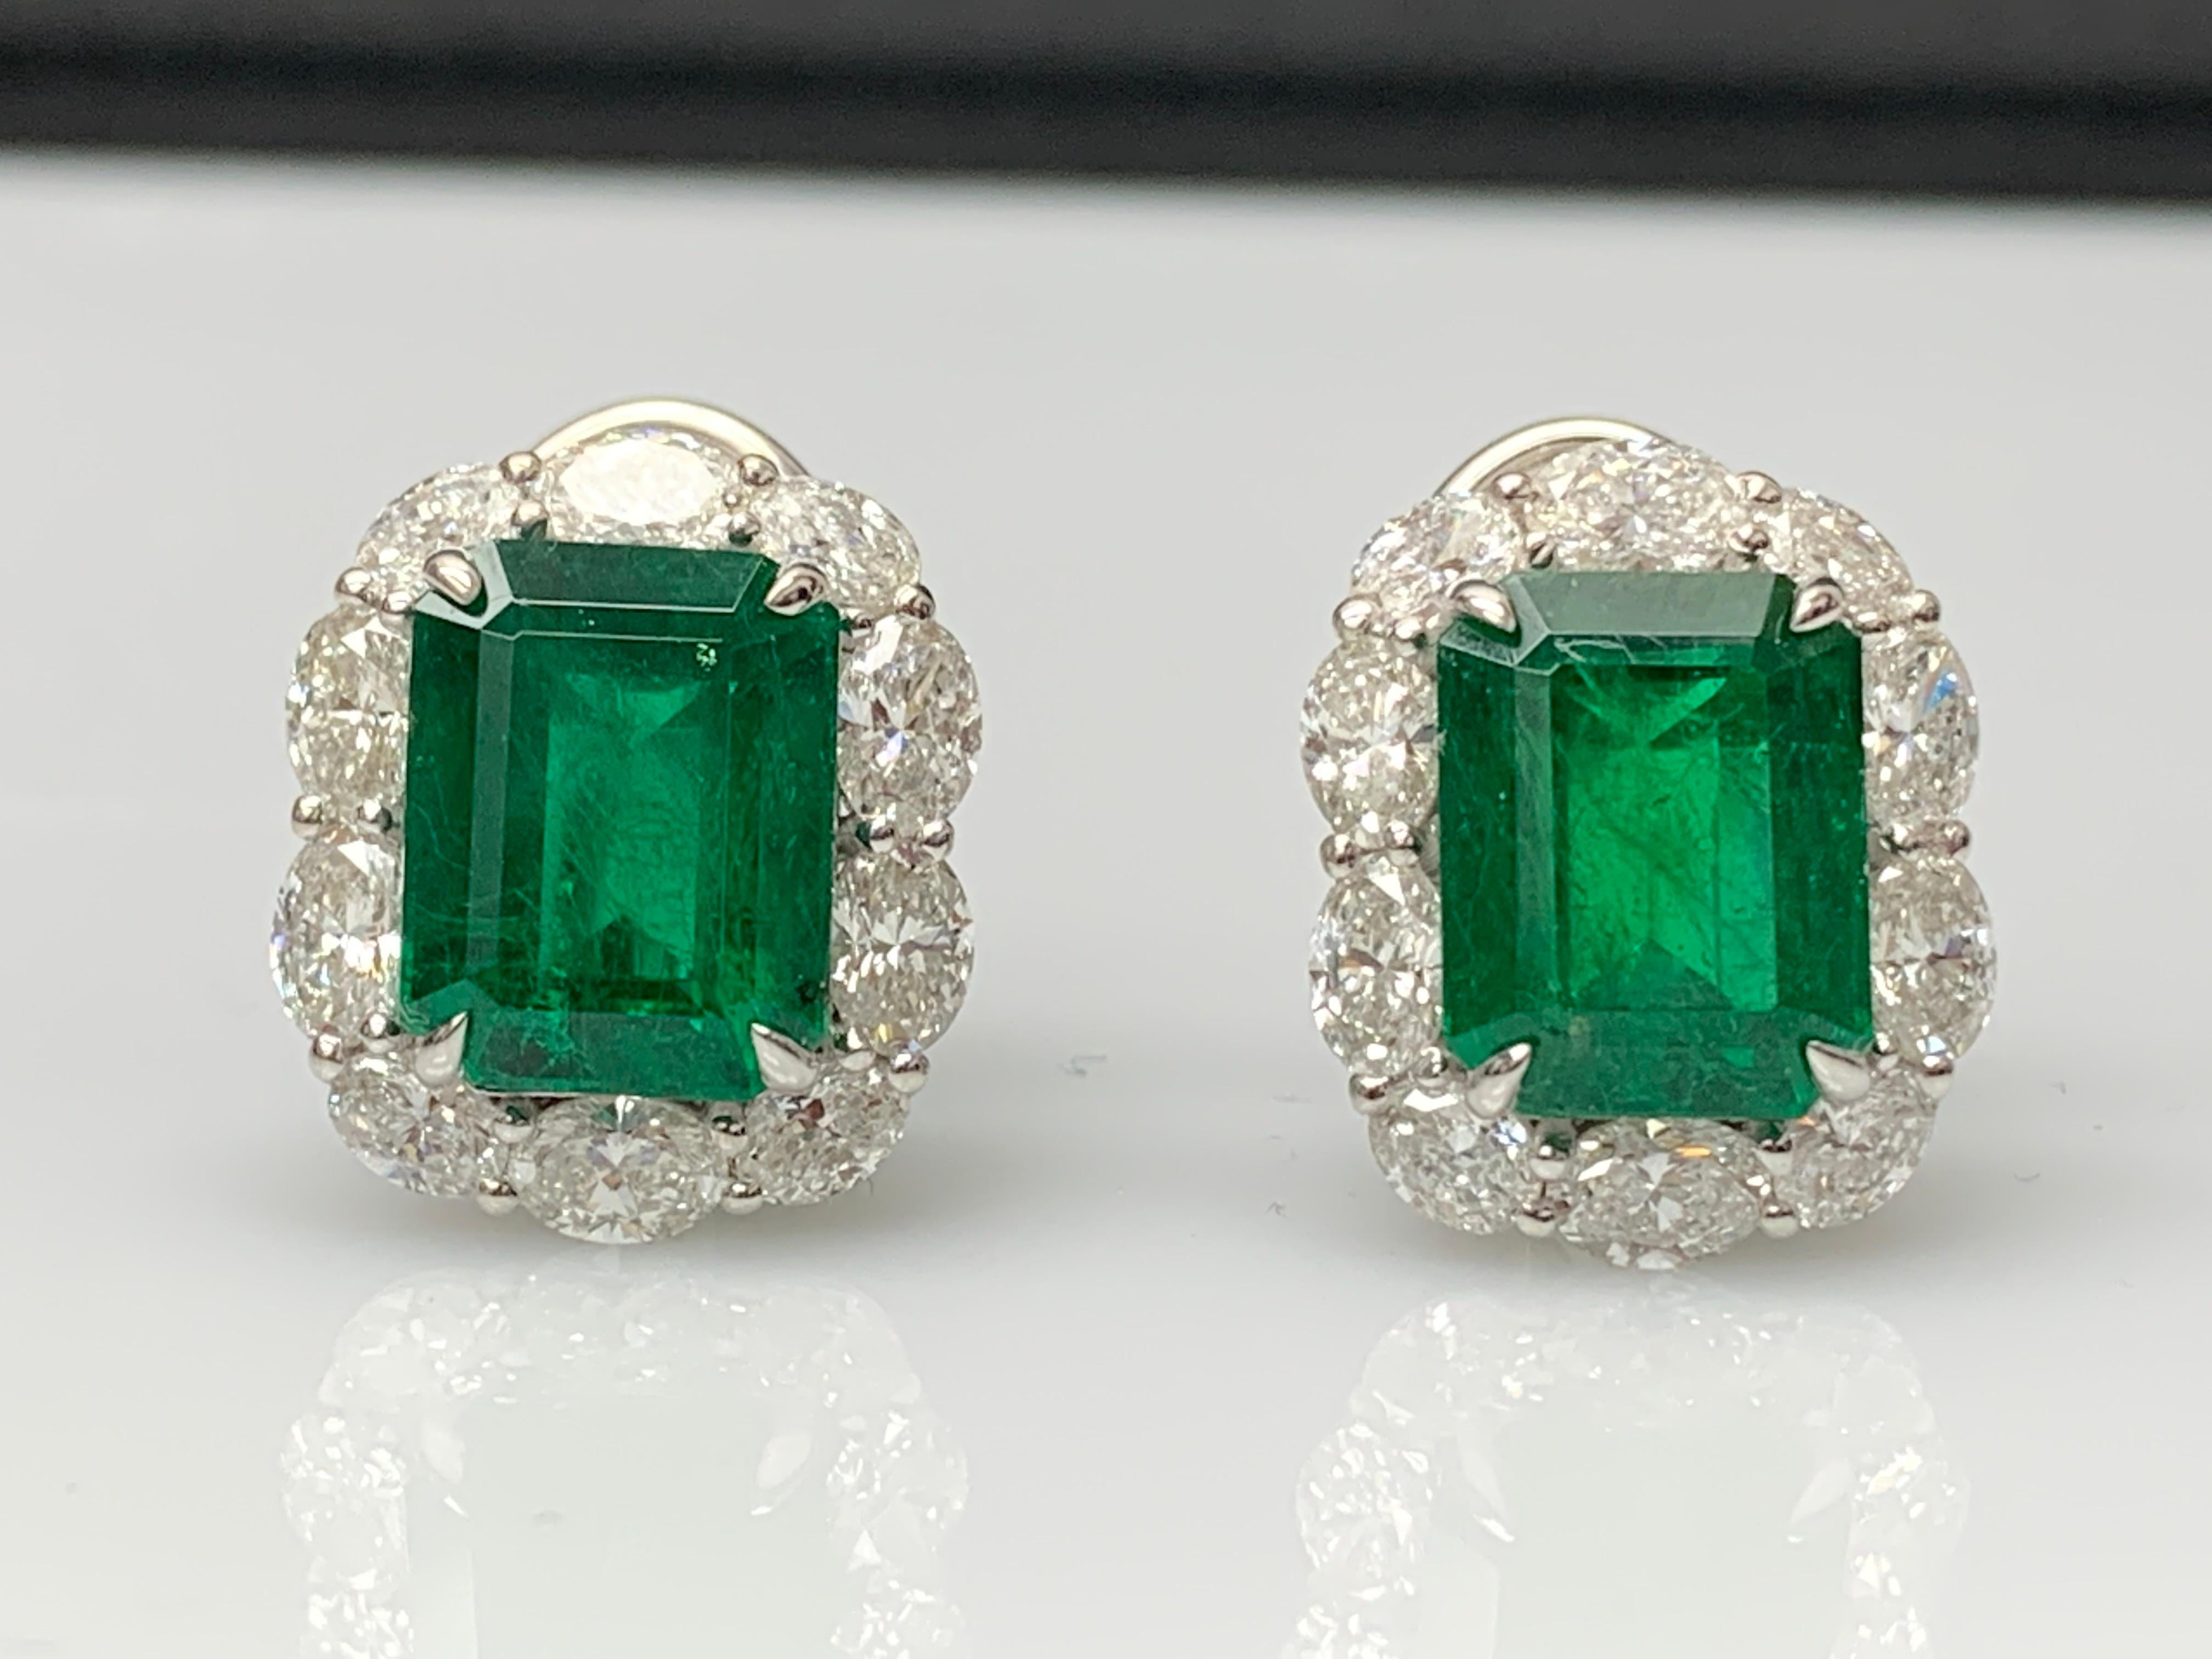 7.44 Carat Emerald Cut Emerald and Diamond Halo Earring in 18K White Gold For Sale 2